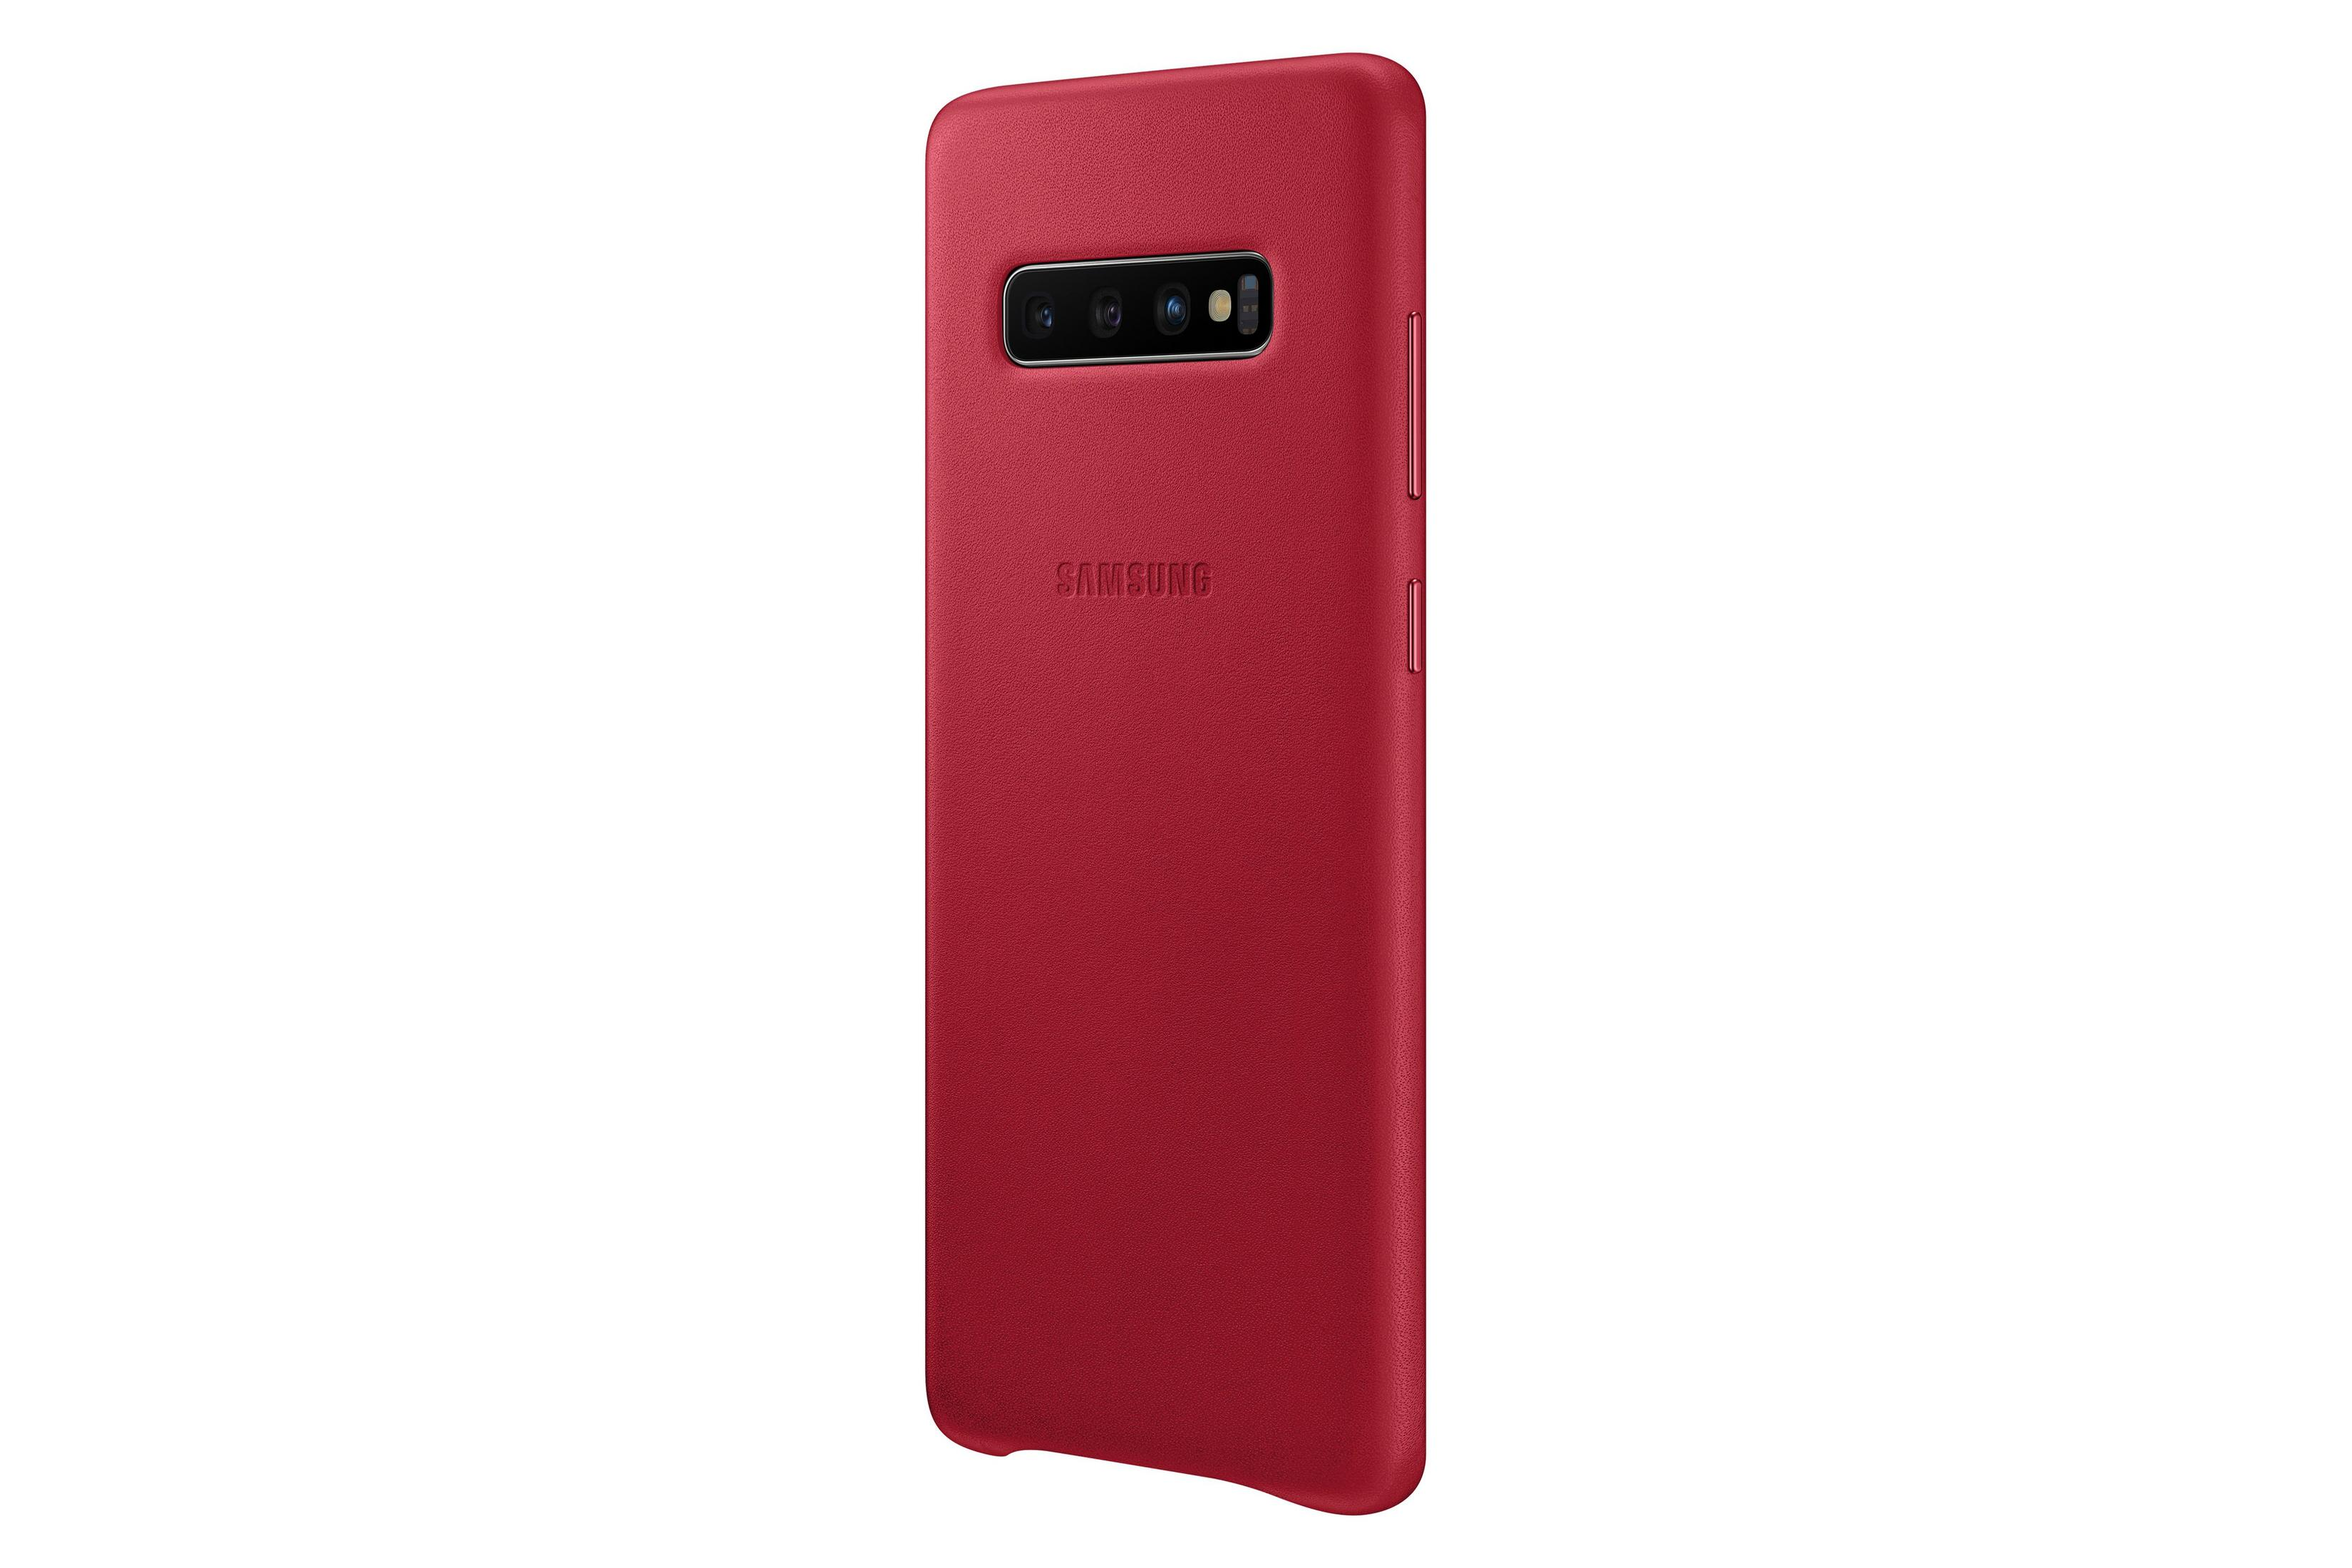 SAMSUNG COVER S10+ Rot S10+, LEATHER RED, Galaxy Samsung, EF-VG975LREGWW Backcover,